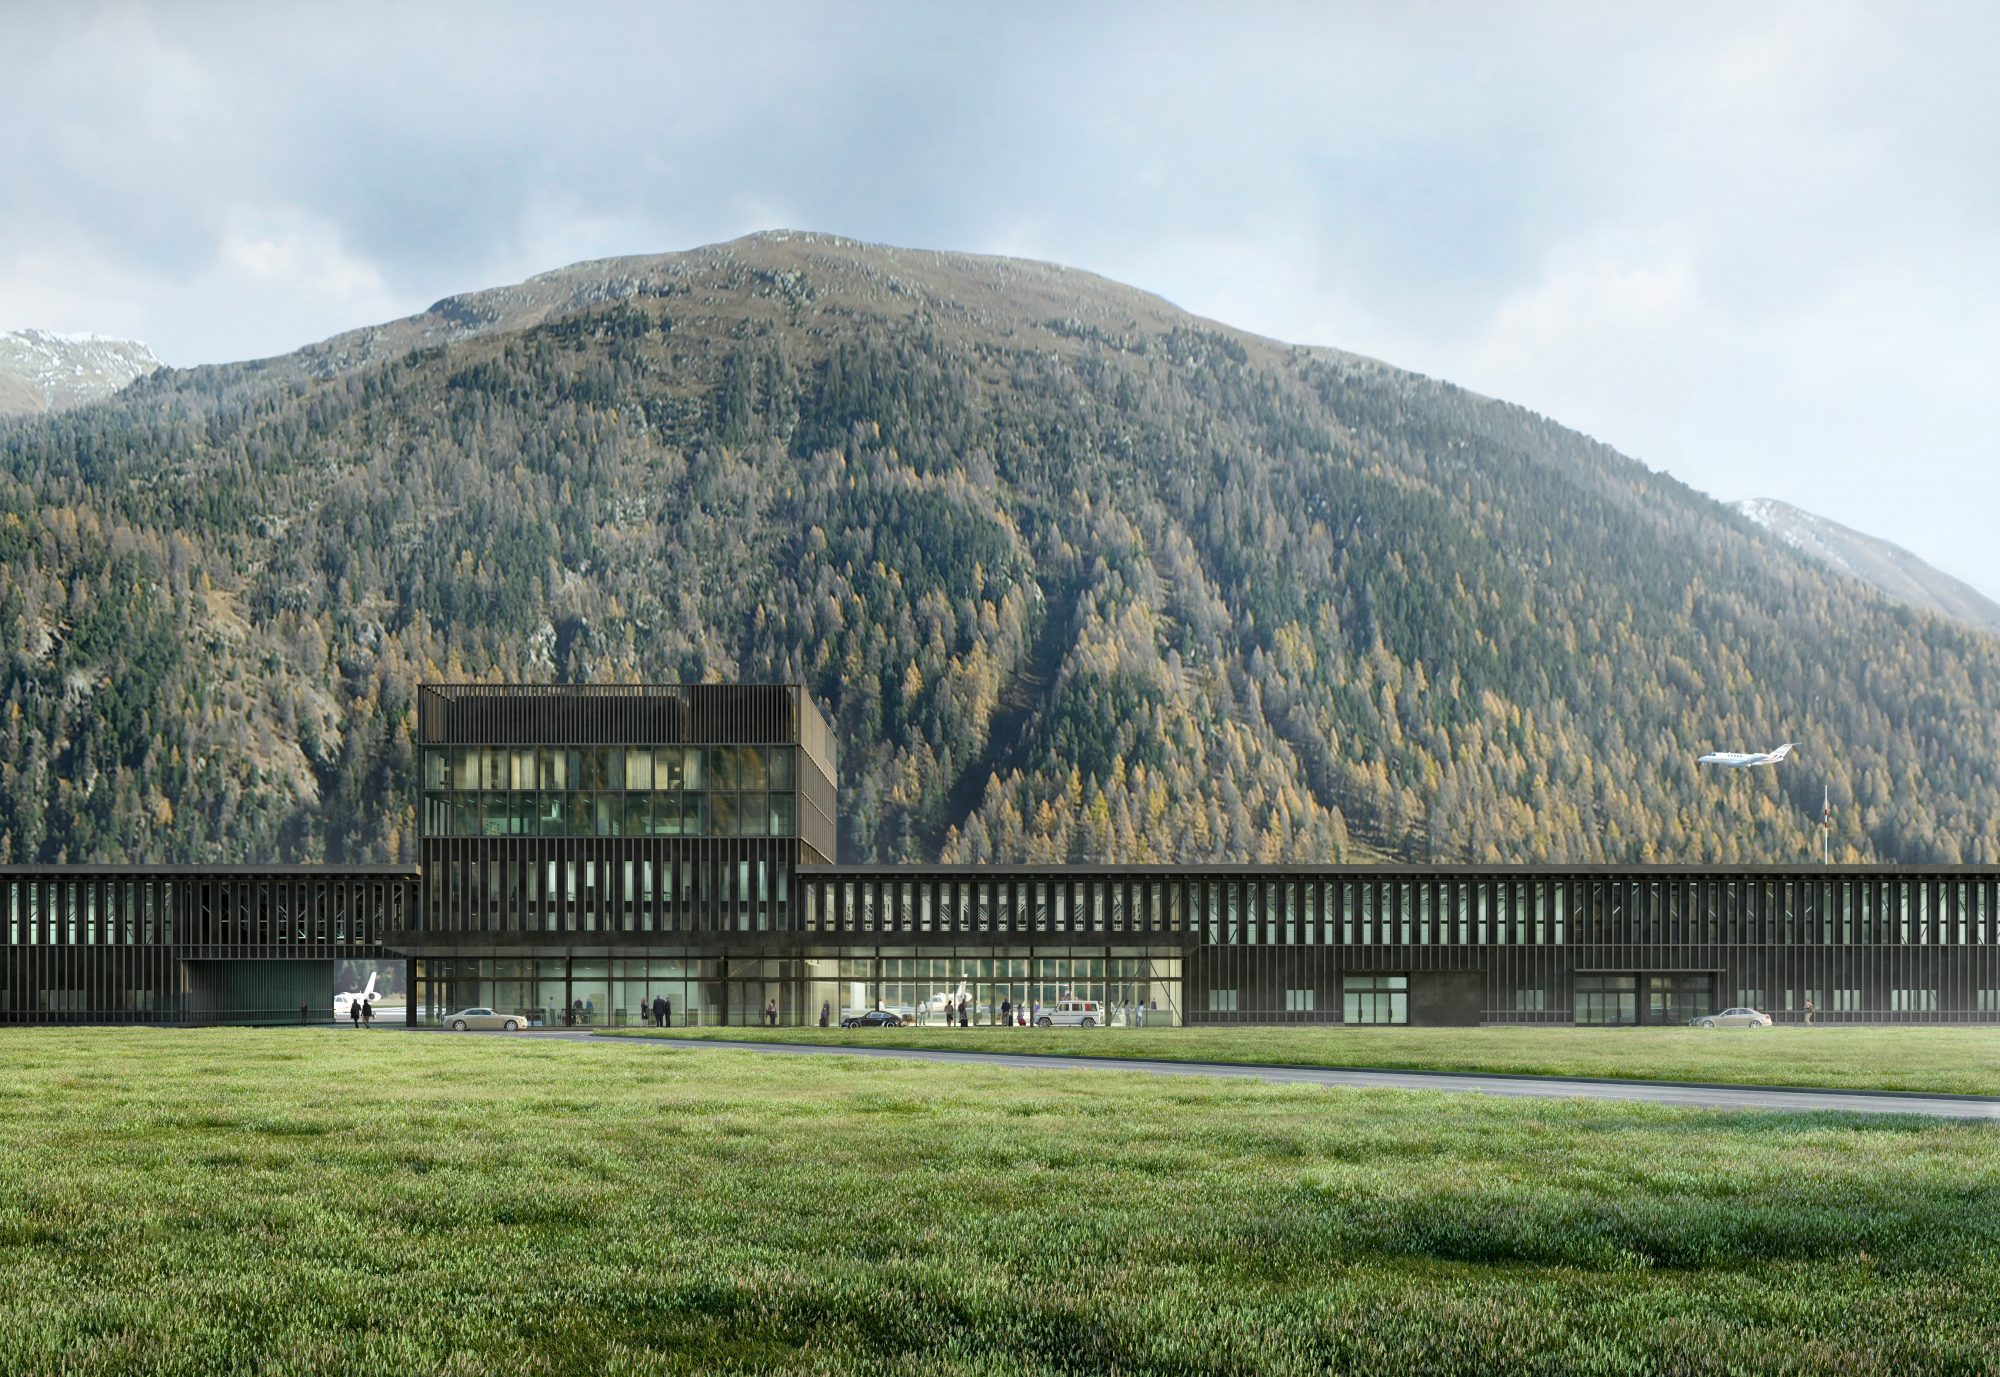 The front of the façade of the Engadin airport, Samedan Regional Airport, Europe's highest airport. Photo by: Samedan Regional Airport.